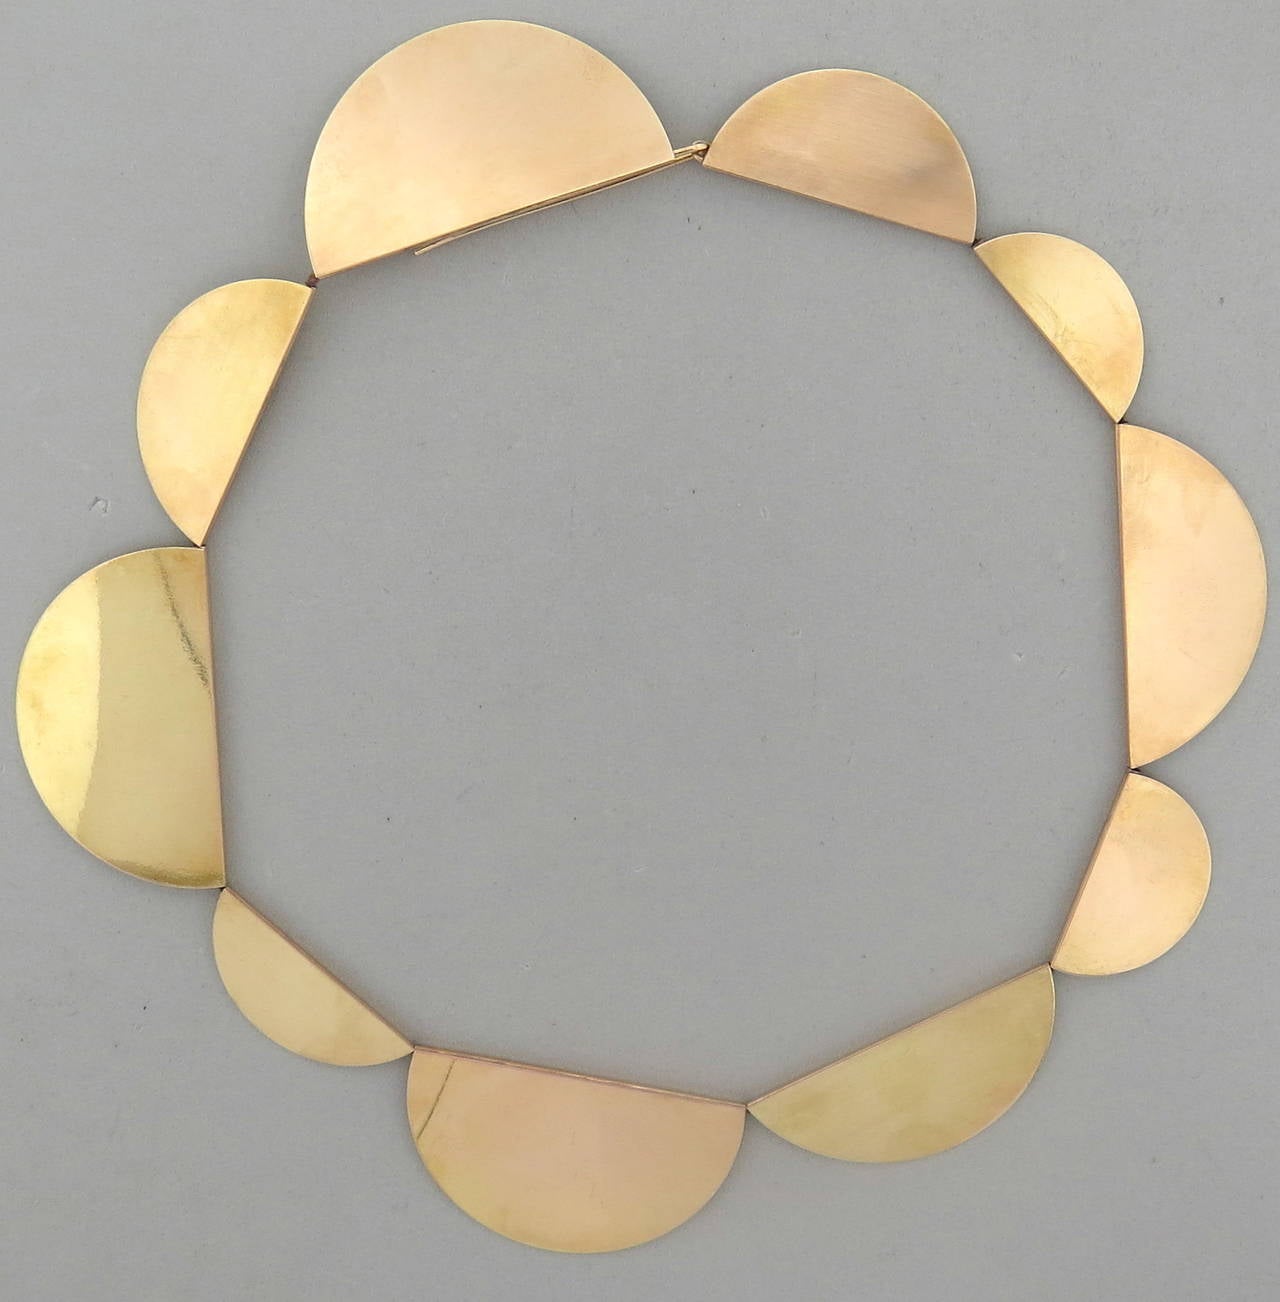 A 14k yellow gold necklace in the Modernist style.  Crafted by Betty Cooke, the necklace measures 17.25